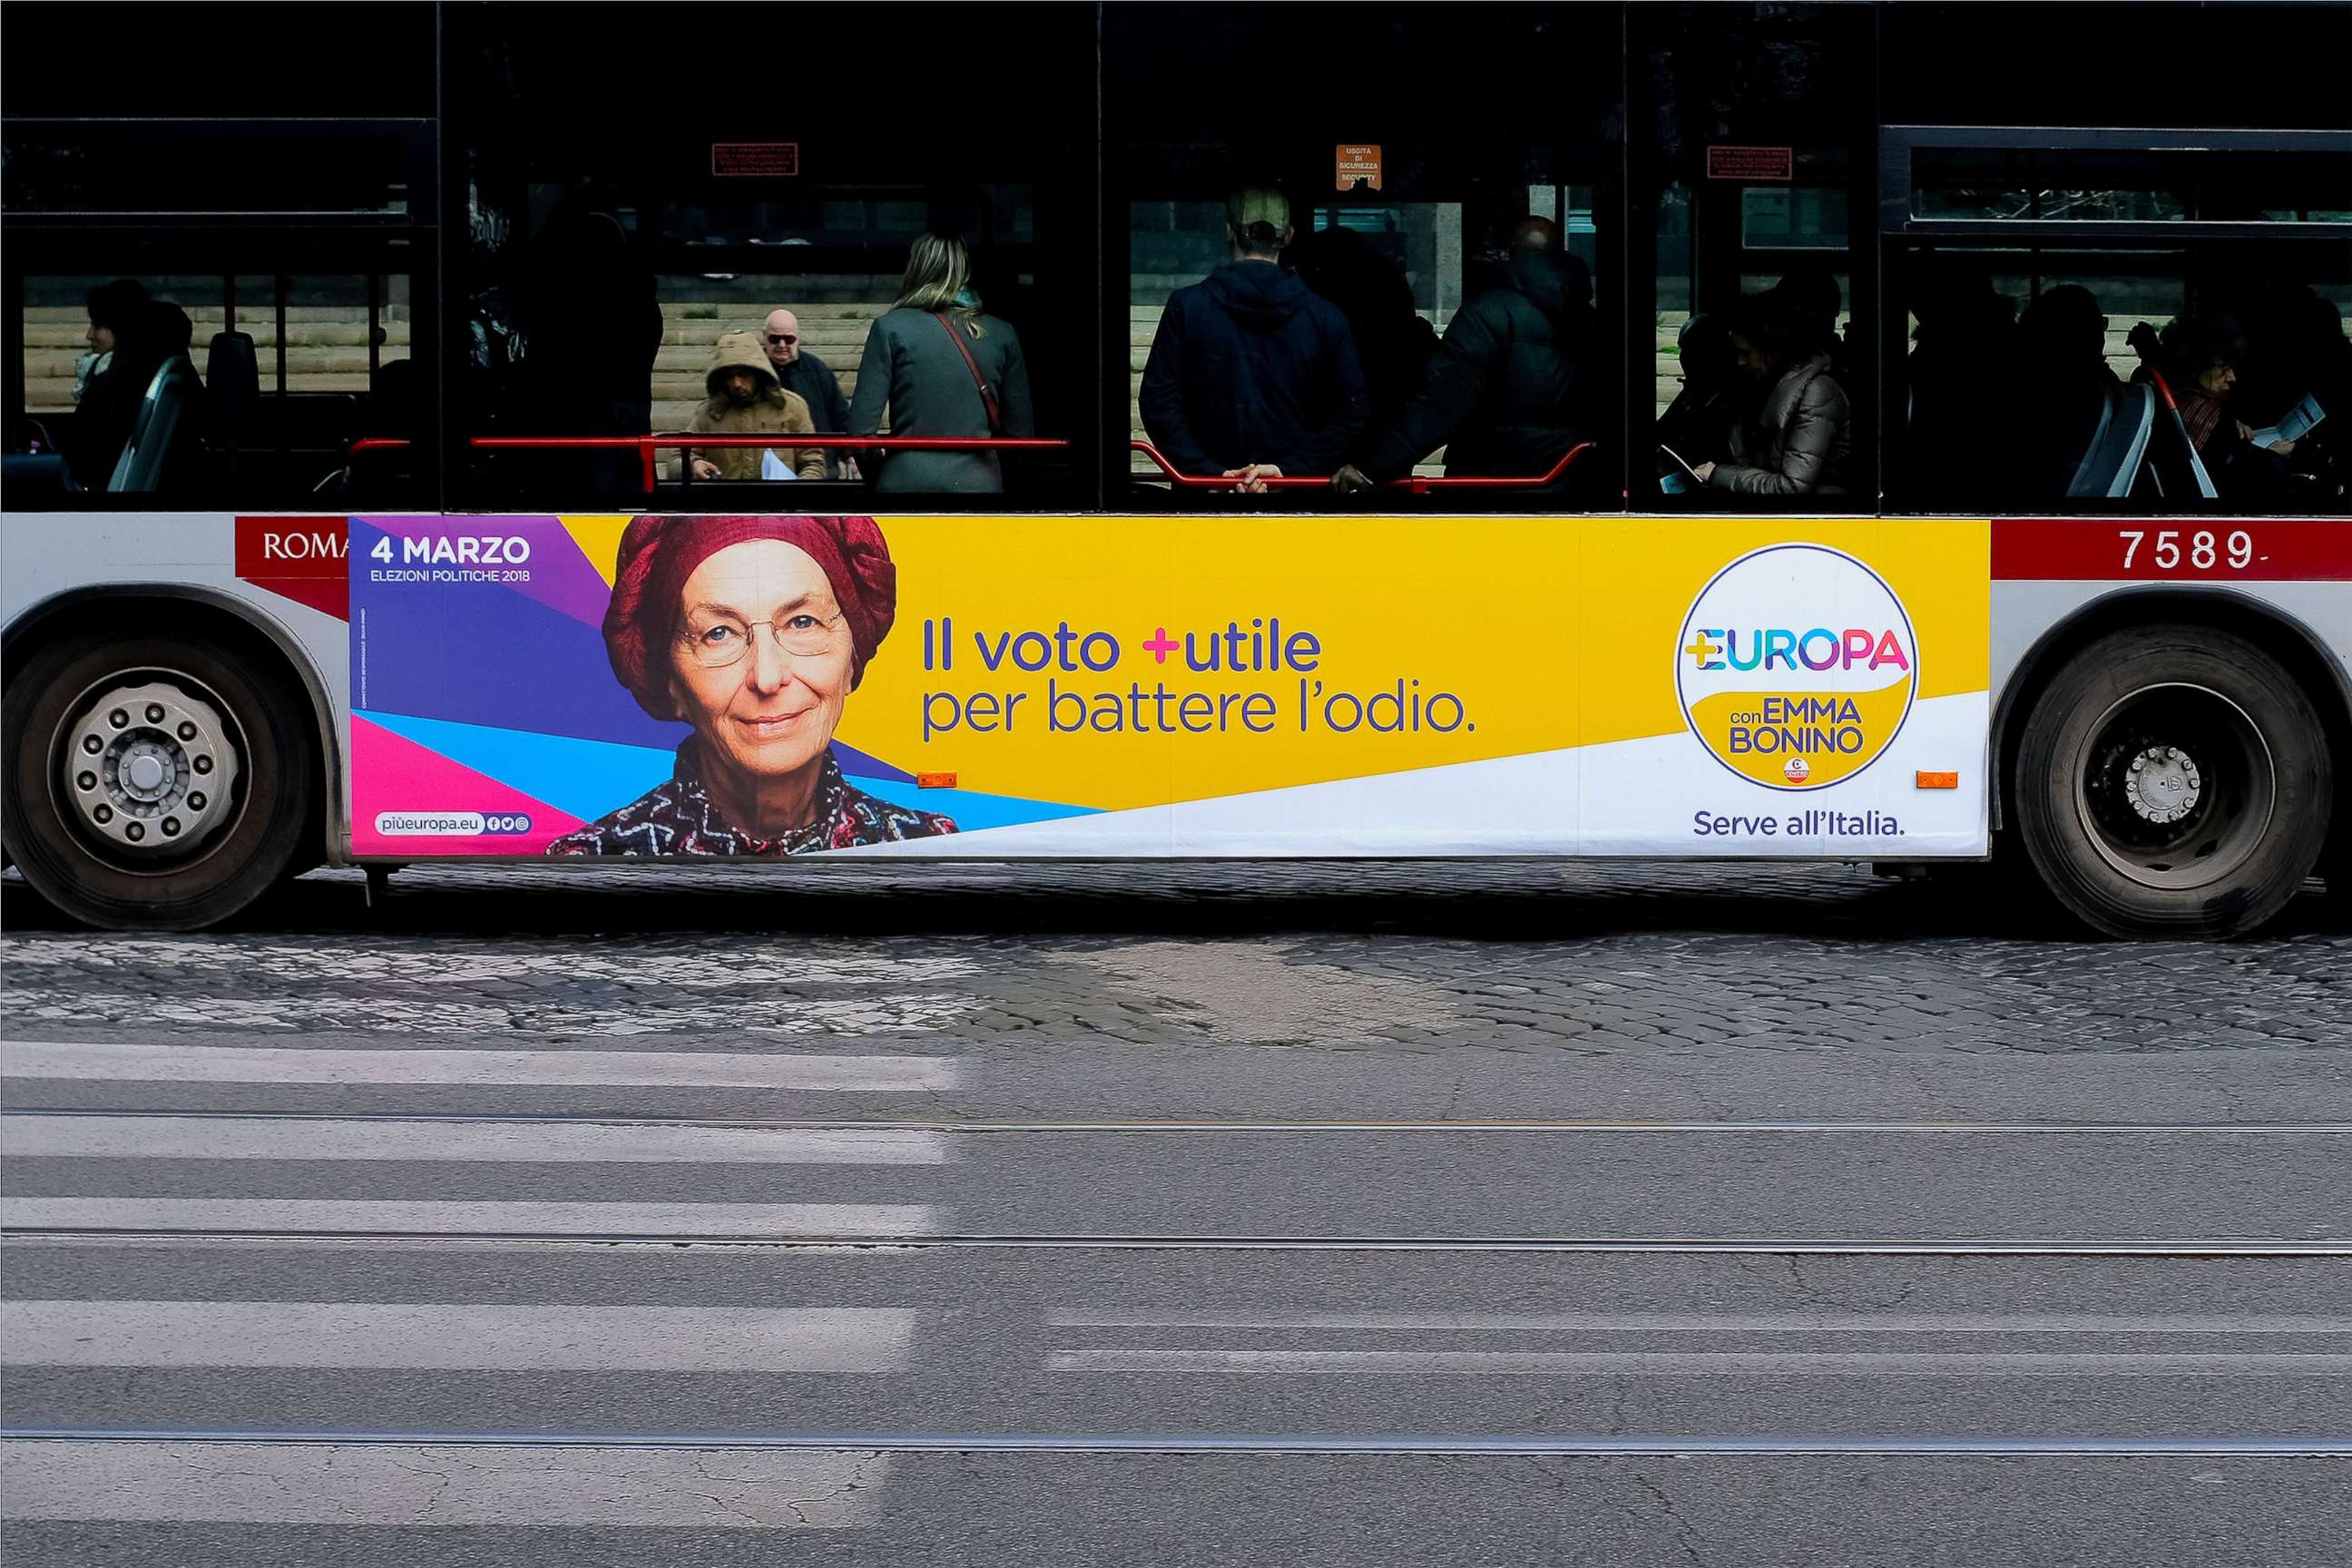 PHOTO: An election poster for the Europa party is seen on the side of a bus in Rome on Feb. 21, 2018, ahead of Italy's March 4 general elections. 